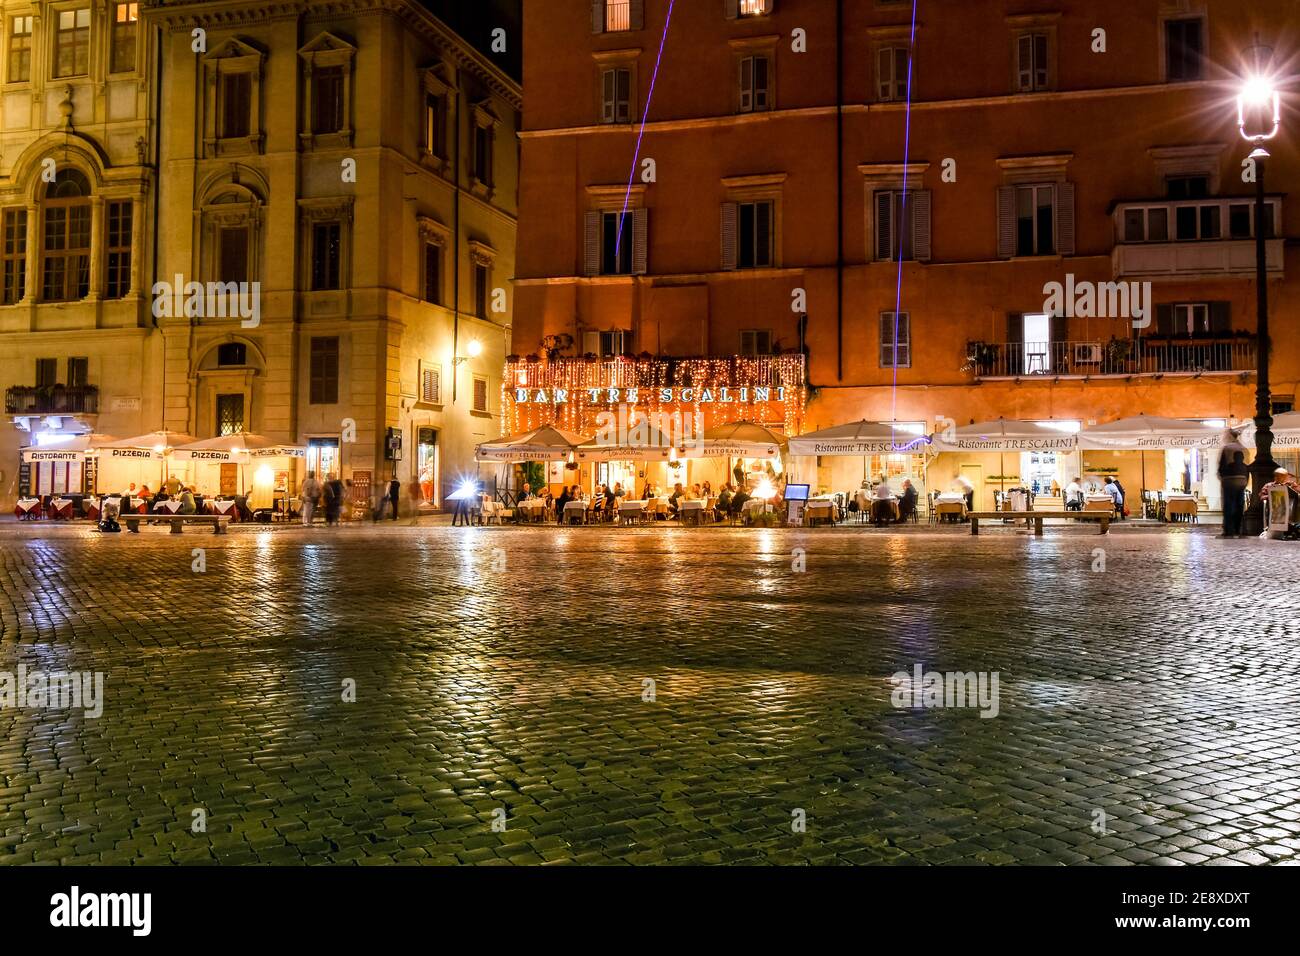 Illuminated cafes and restaurants with tourists late night at the Piazza Navona in Rome, Italy. Stock Photo